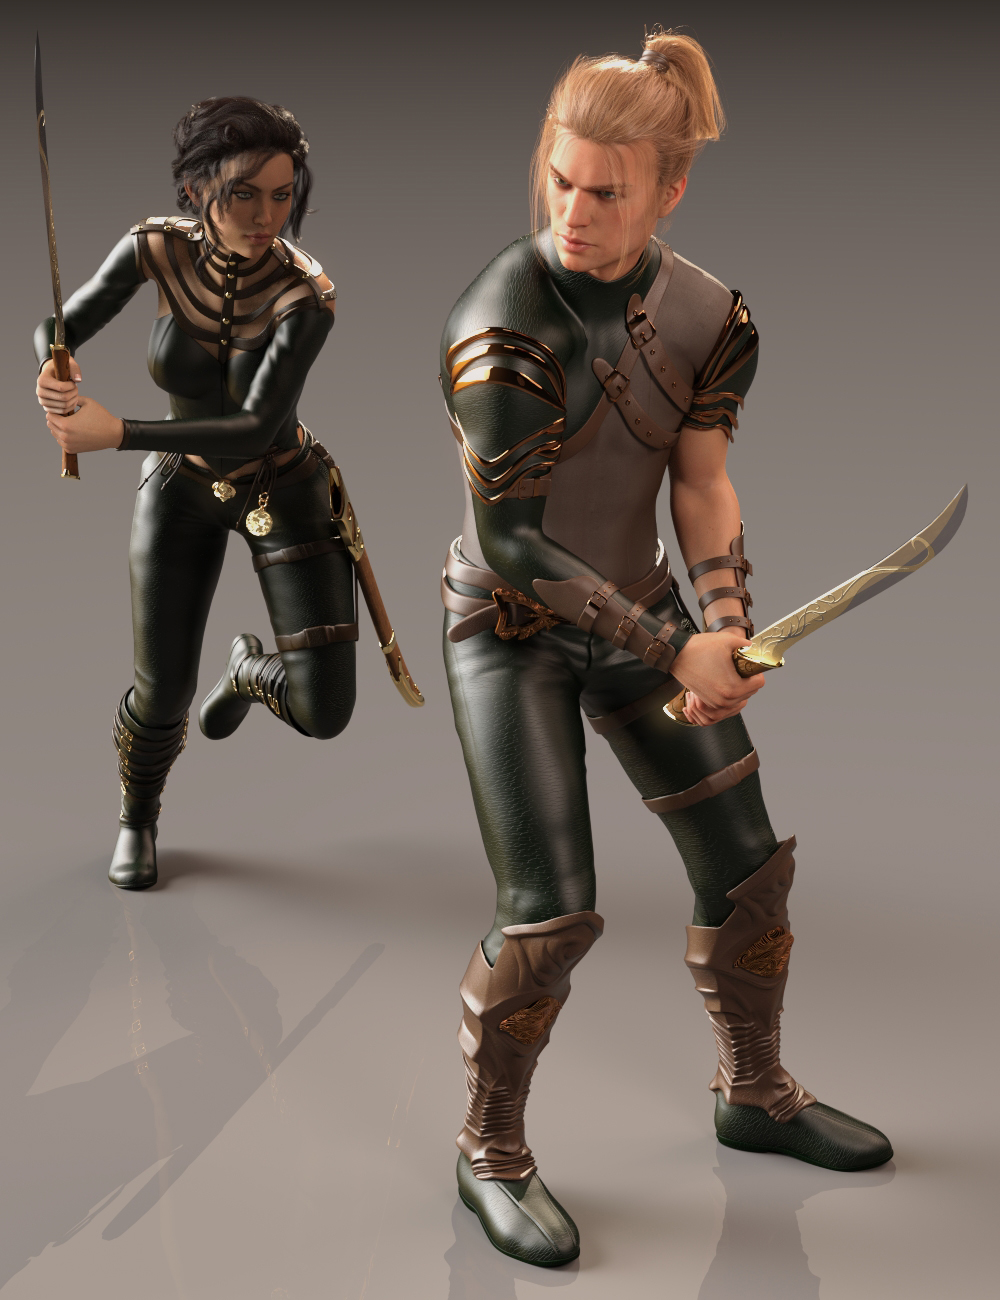 Variety Sword Pack Animations 2 for Genesis 8